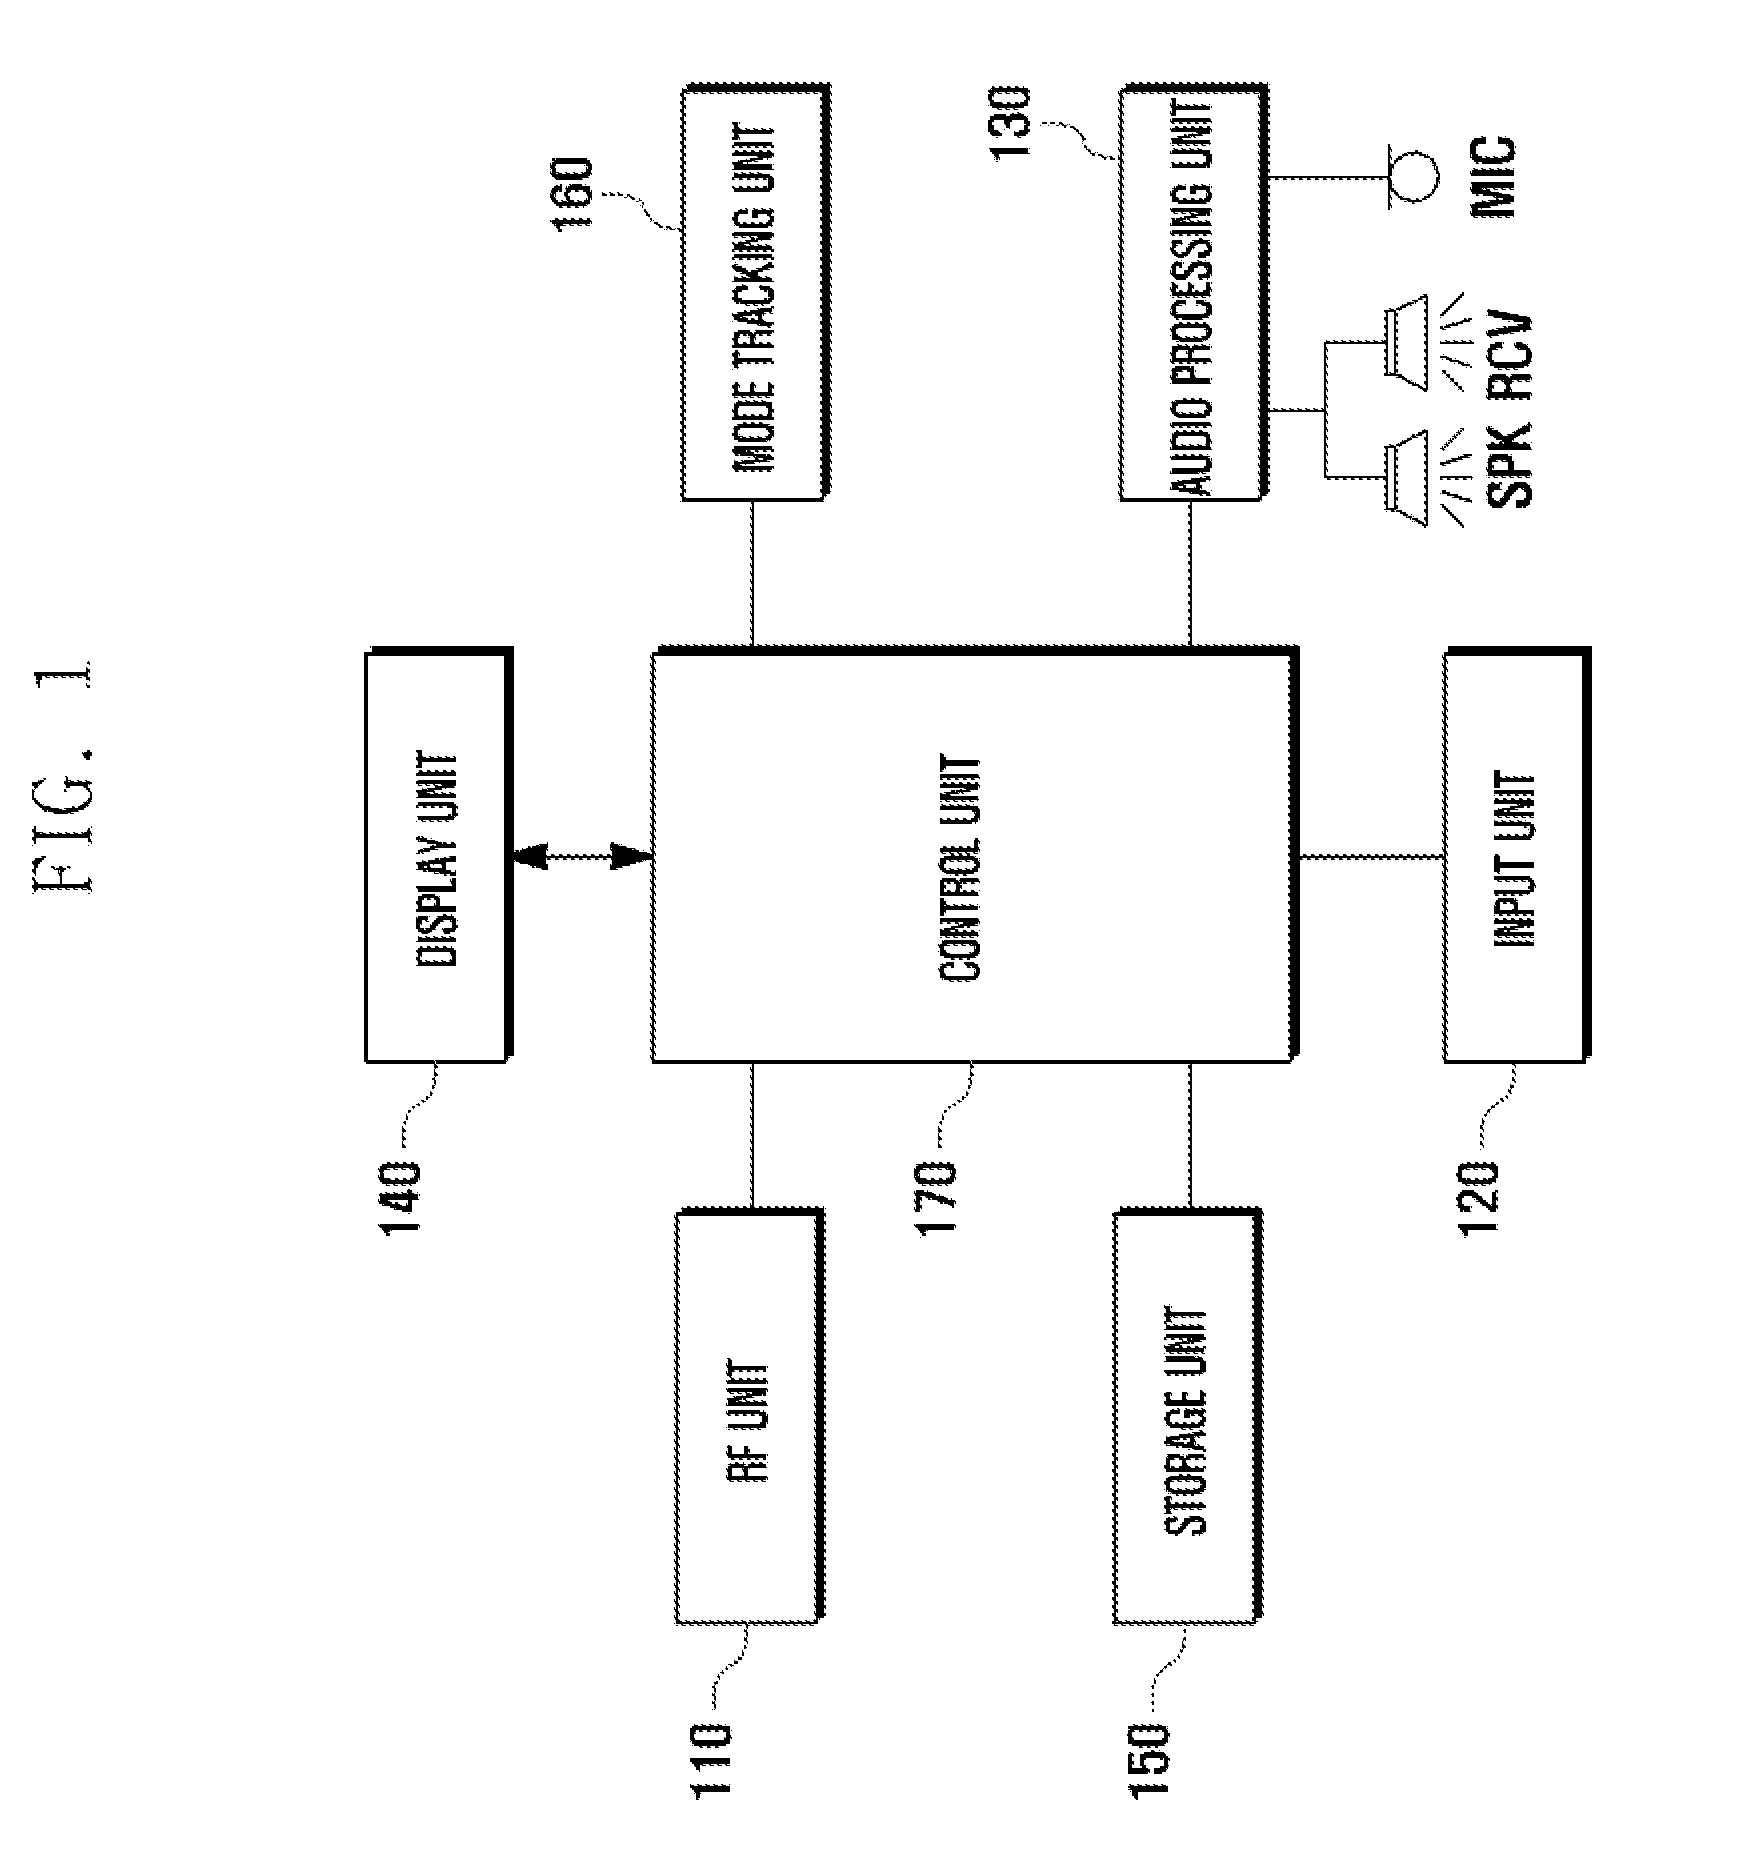 Voice call processing method and apparatus for mobile terminal